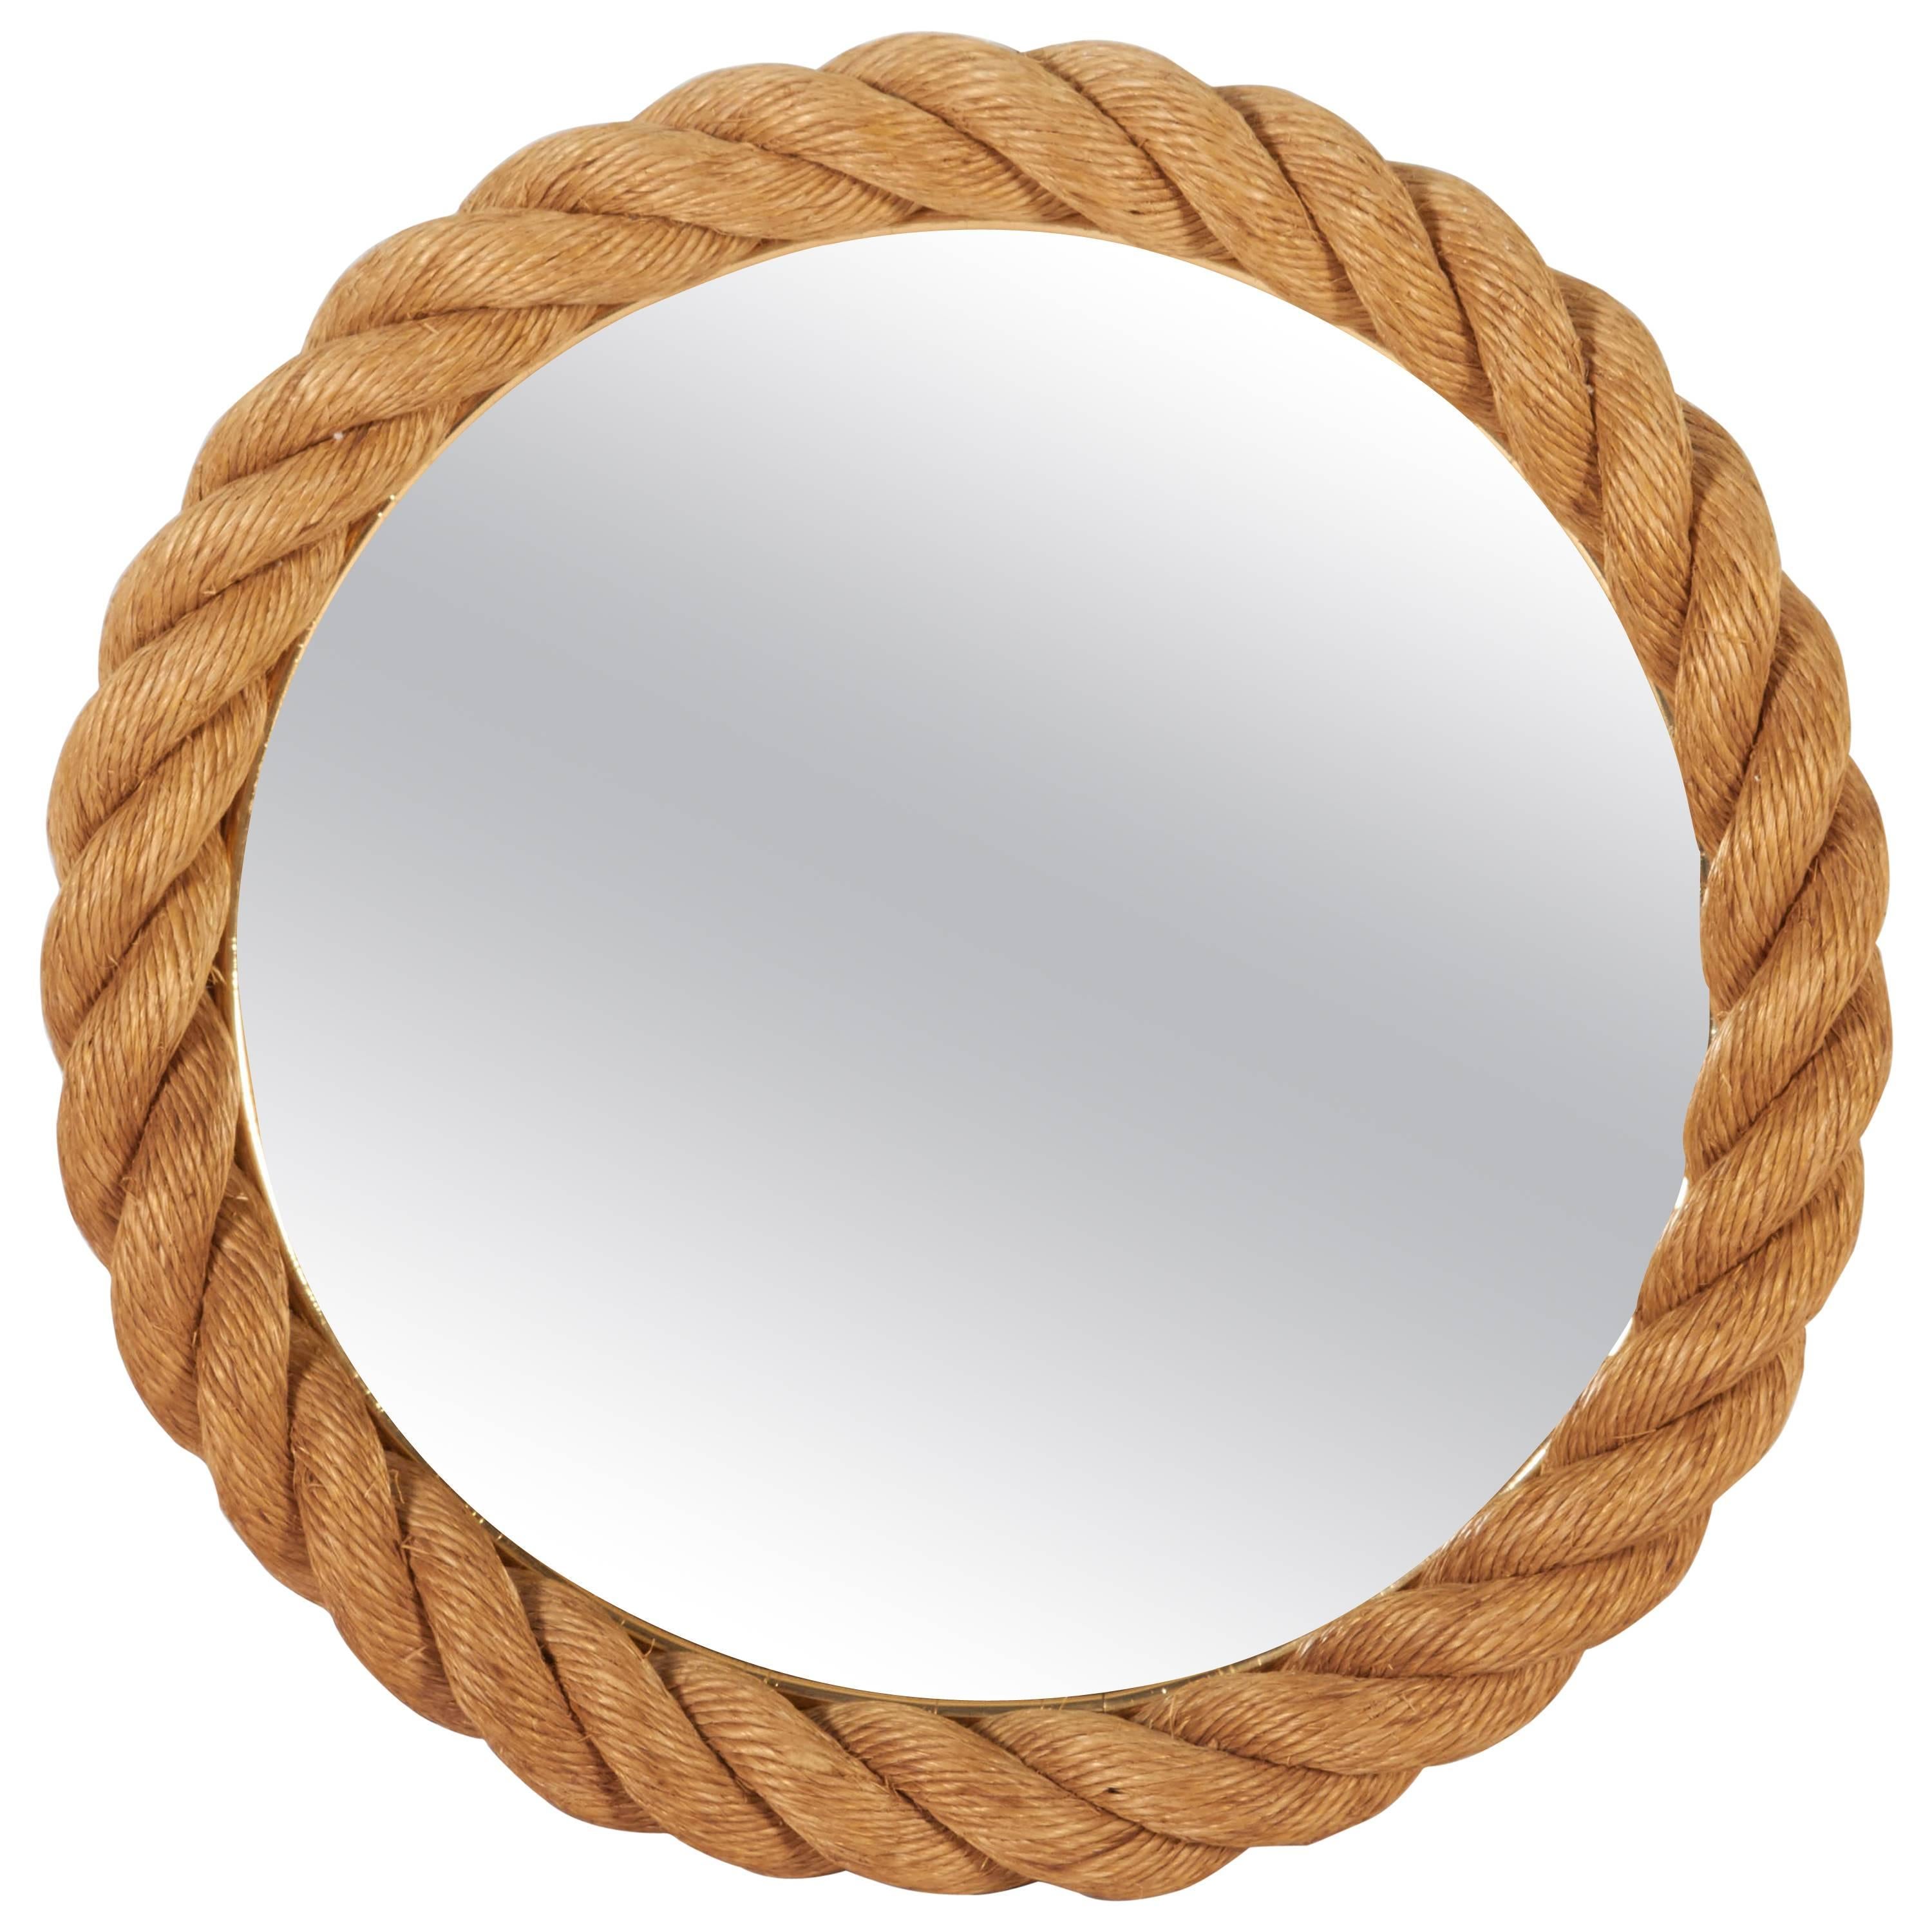 Nautical Style Mirror with Rope